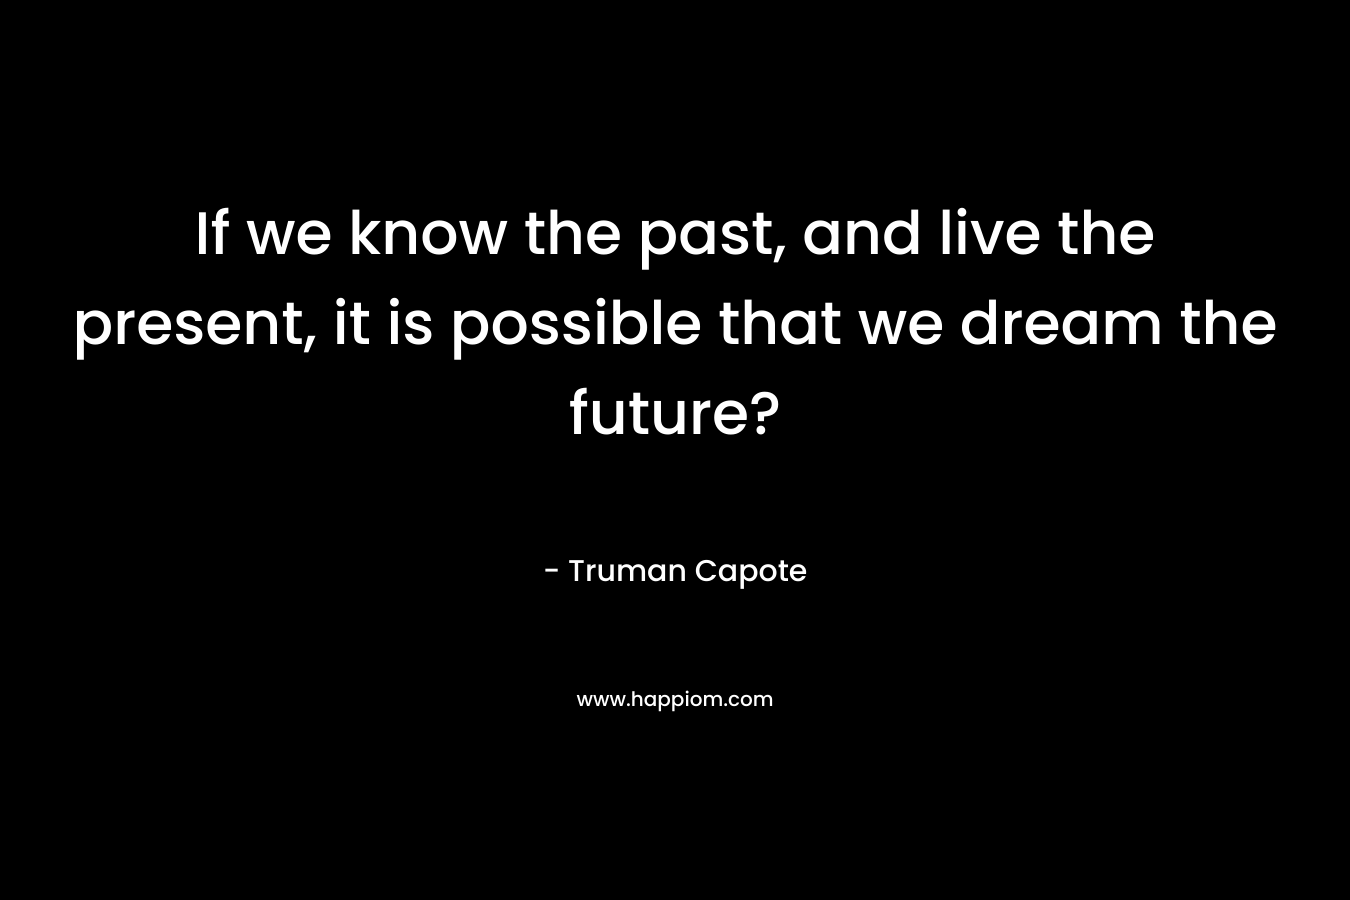 If we know the past, and live the present, it is possible that we dream the future?